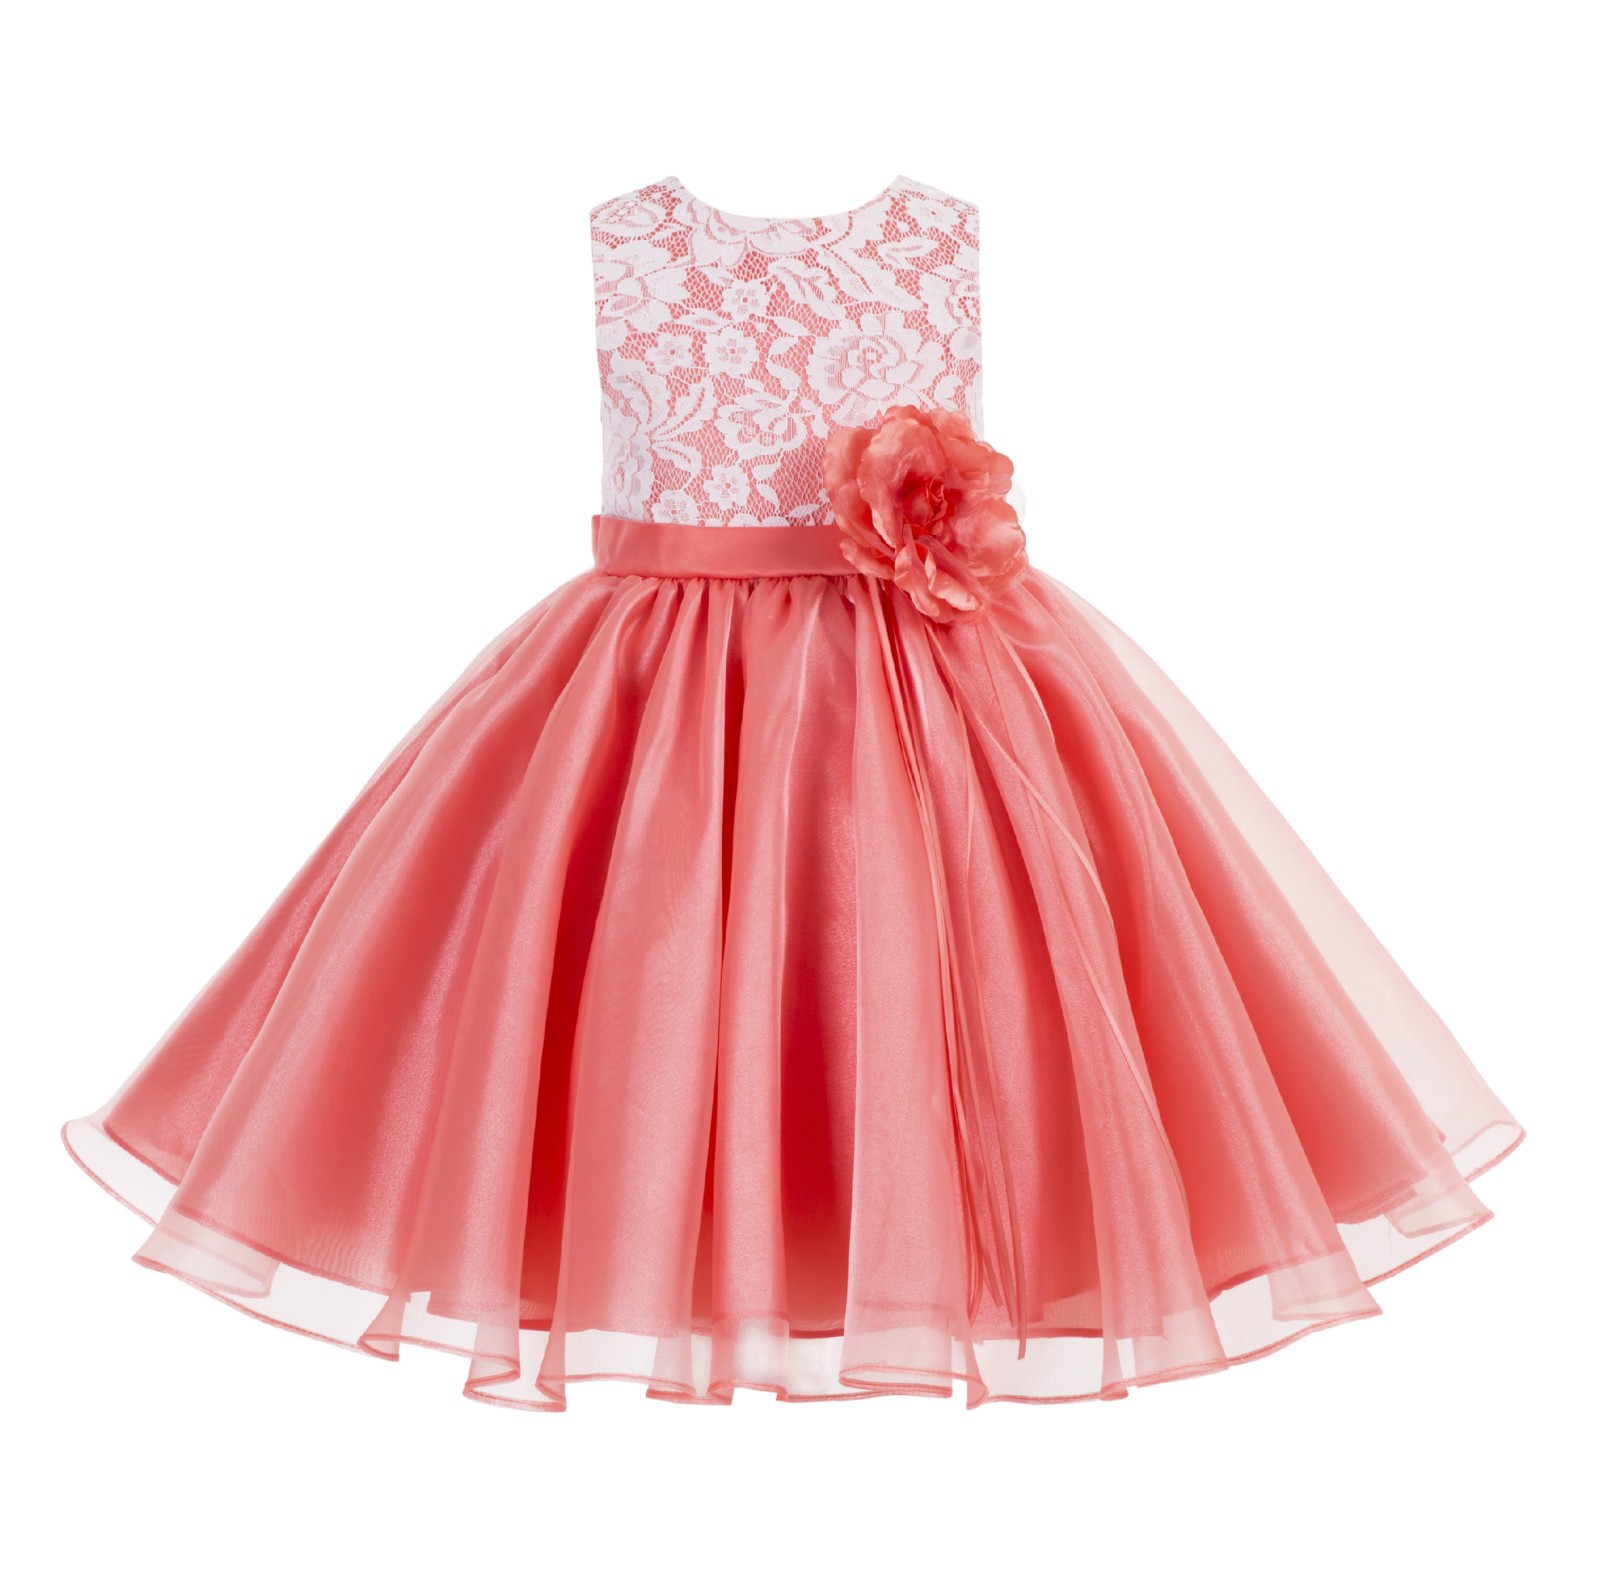 Coral Lace Organza Flower Girl Dress 186F